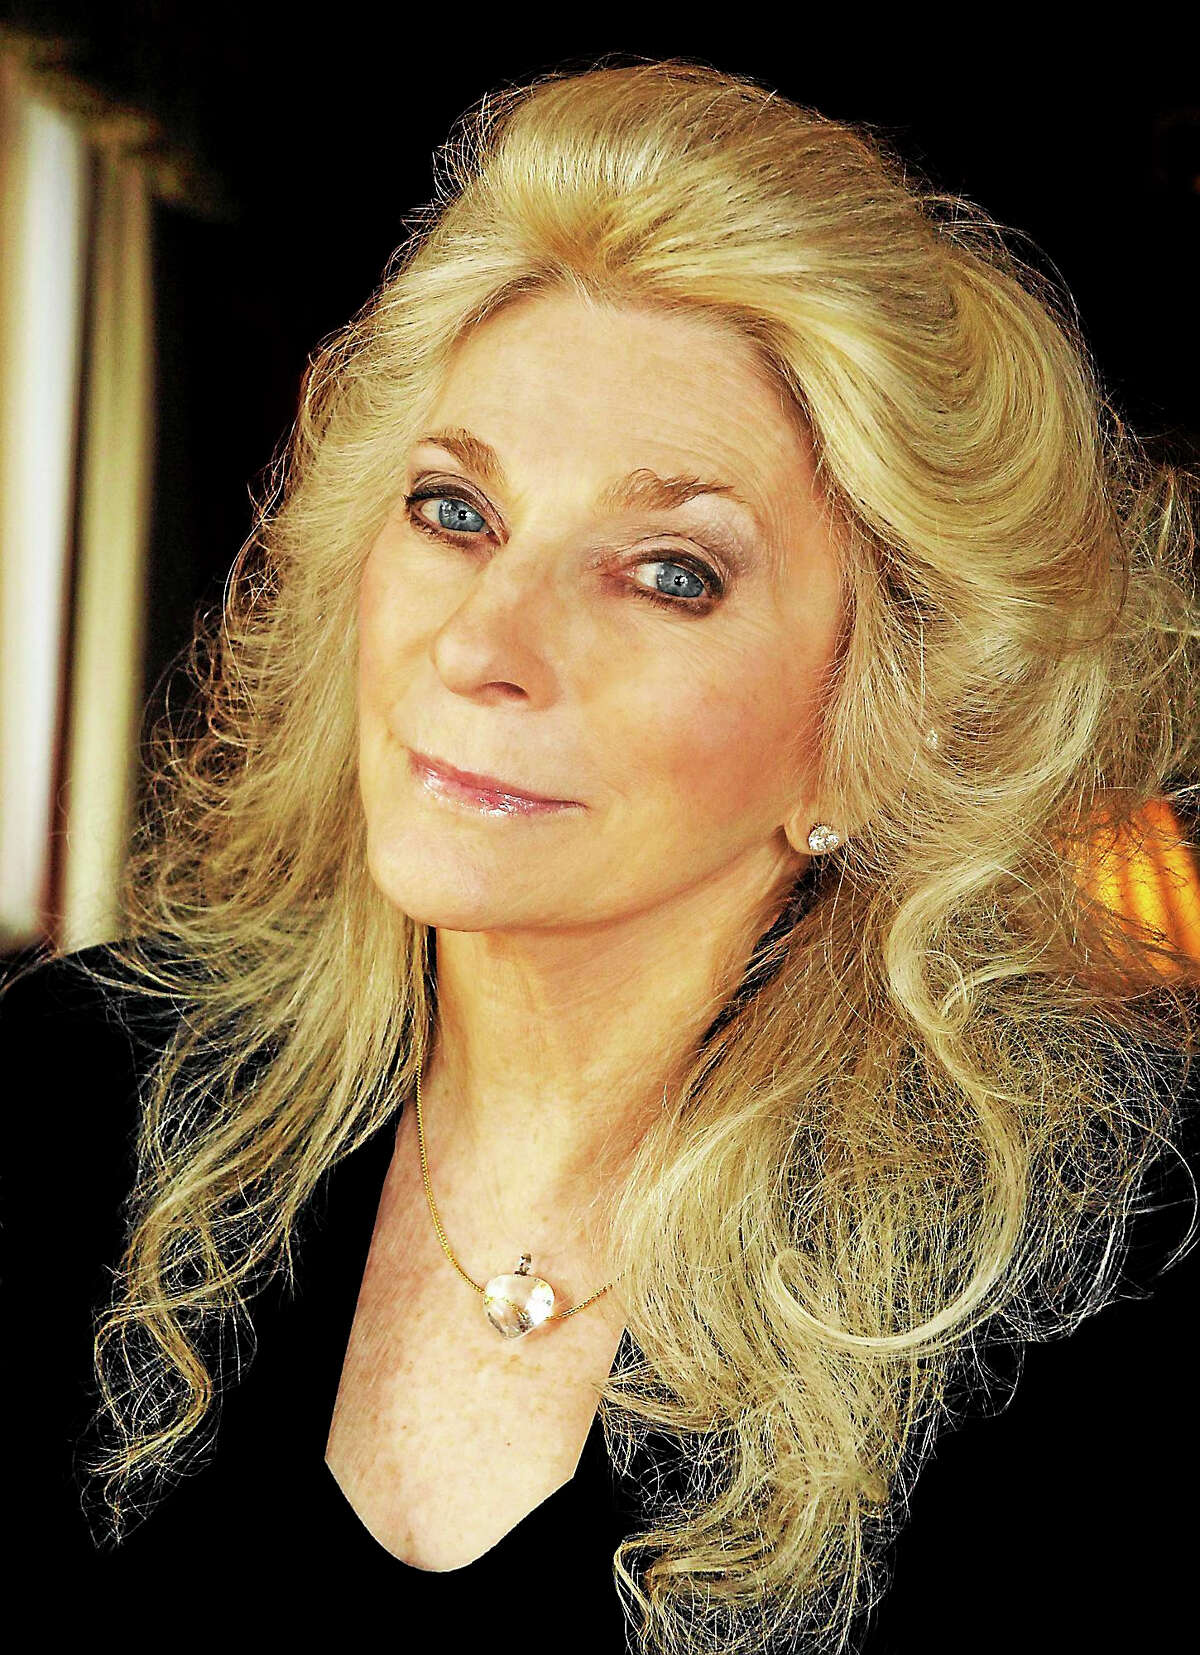 CAMERA PRESS / James Veysey American singer and songwriter Judy Collins is set to perform two shows in the state: first at Infinity Music Hall & Bistro in Hartford Friday, Nov. 27, and Saturday, Nov. 28 at Infinity Music Hall & Bistro in Norfolk. For more information or to purchase tickets on these special upcoming performances, call the box office at 866-666-6306 or visit www.infinityhall.com